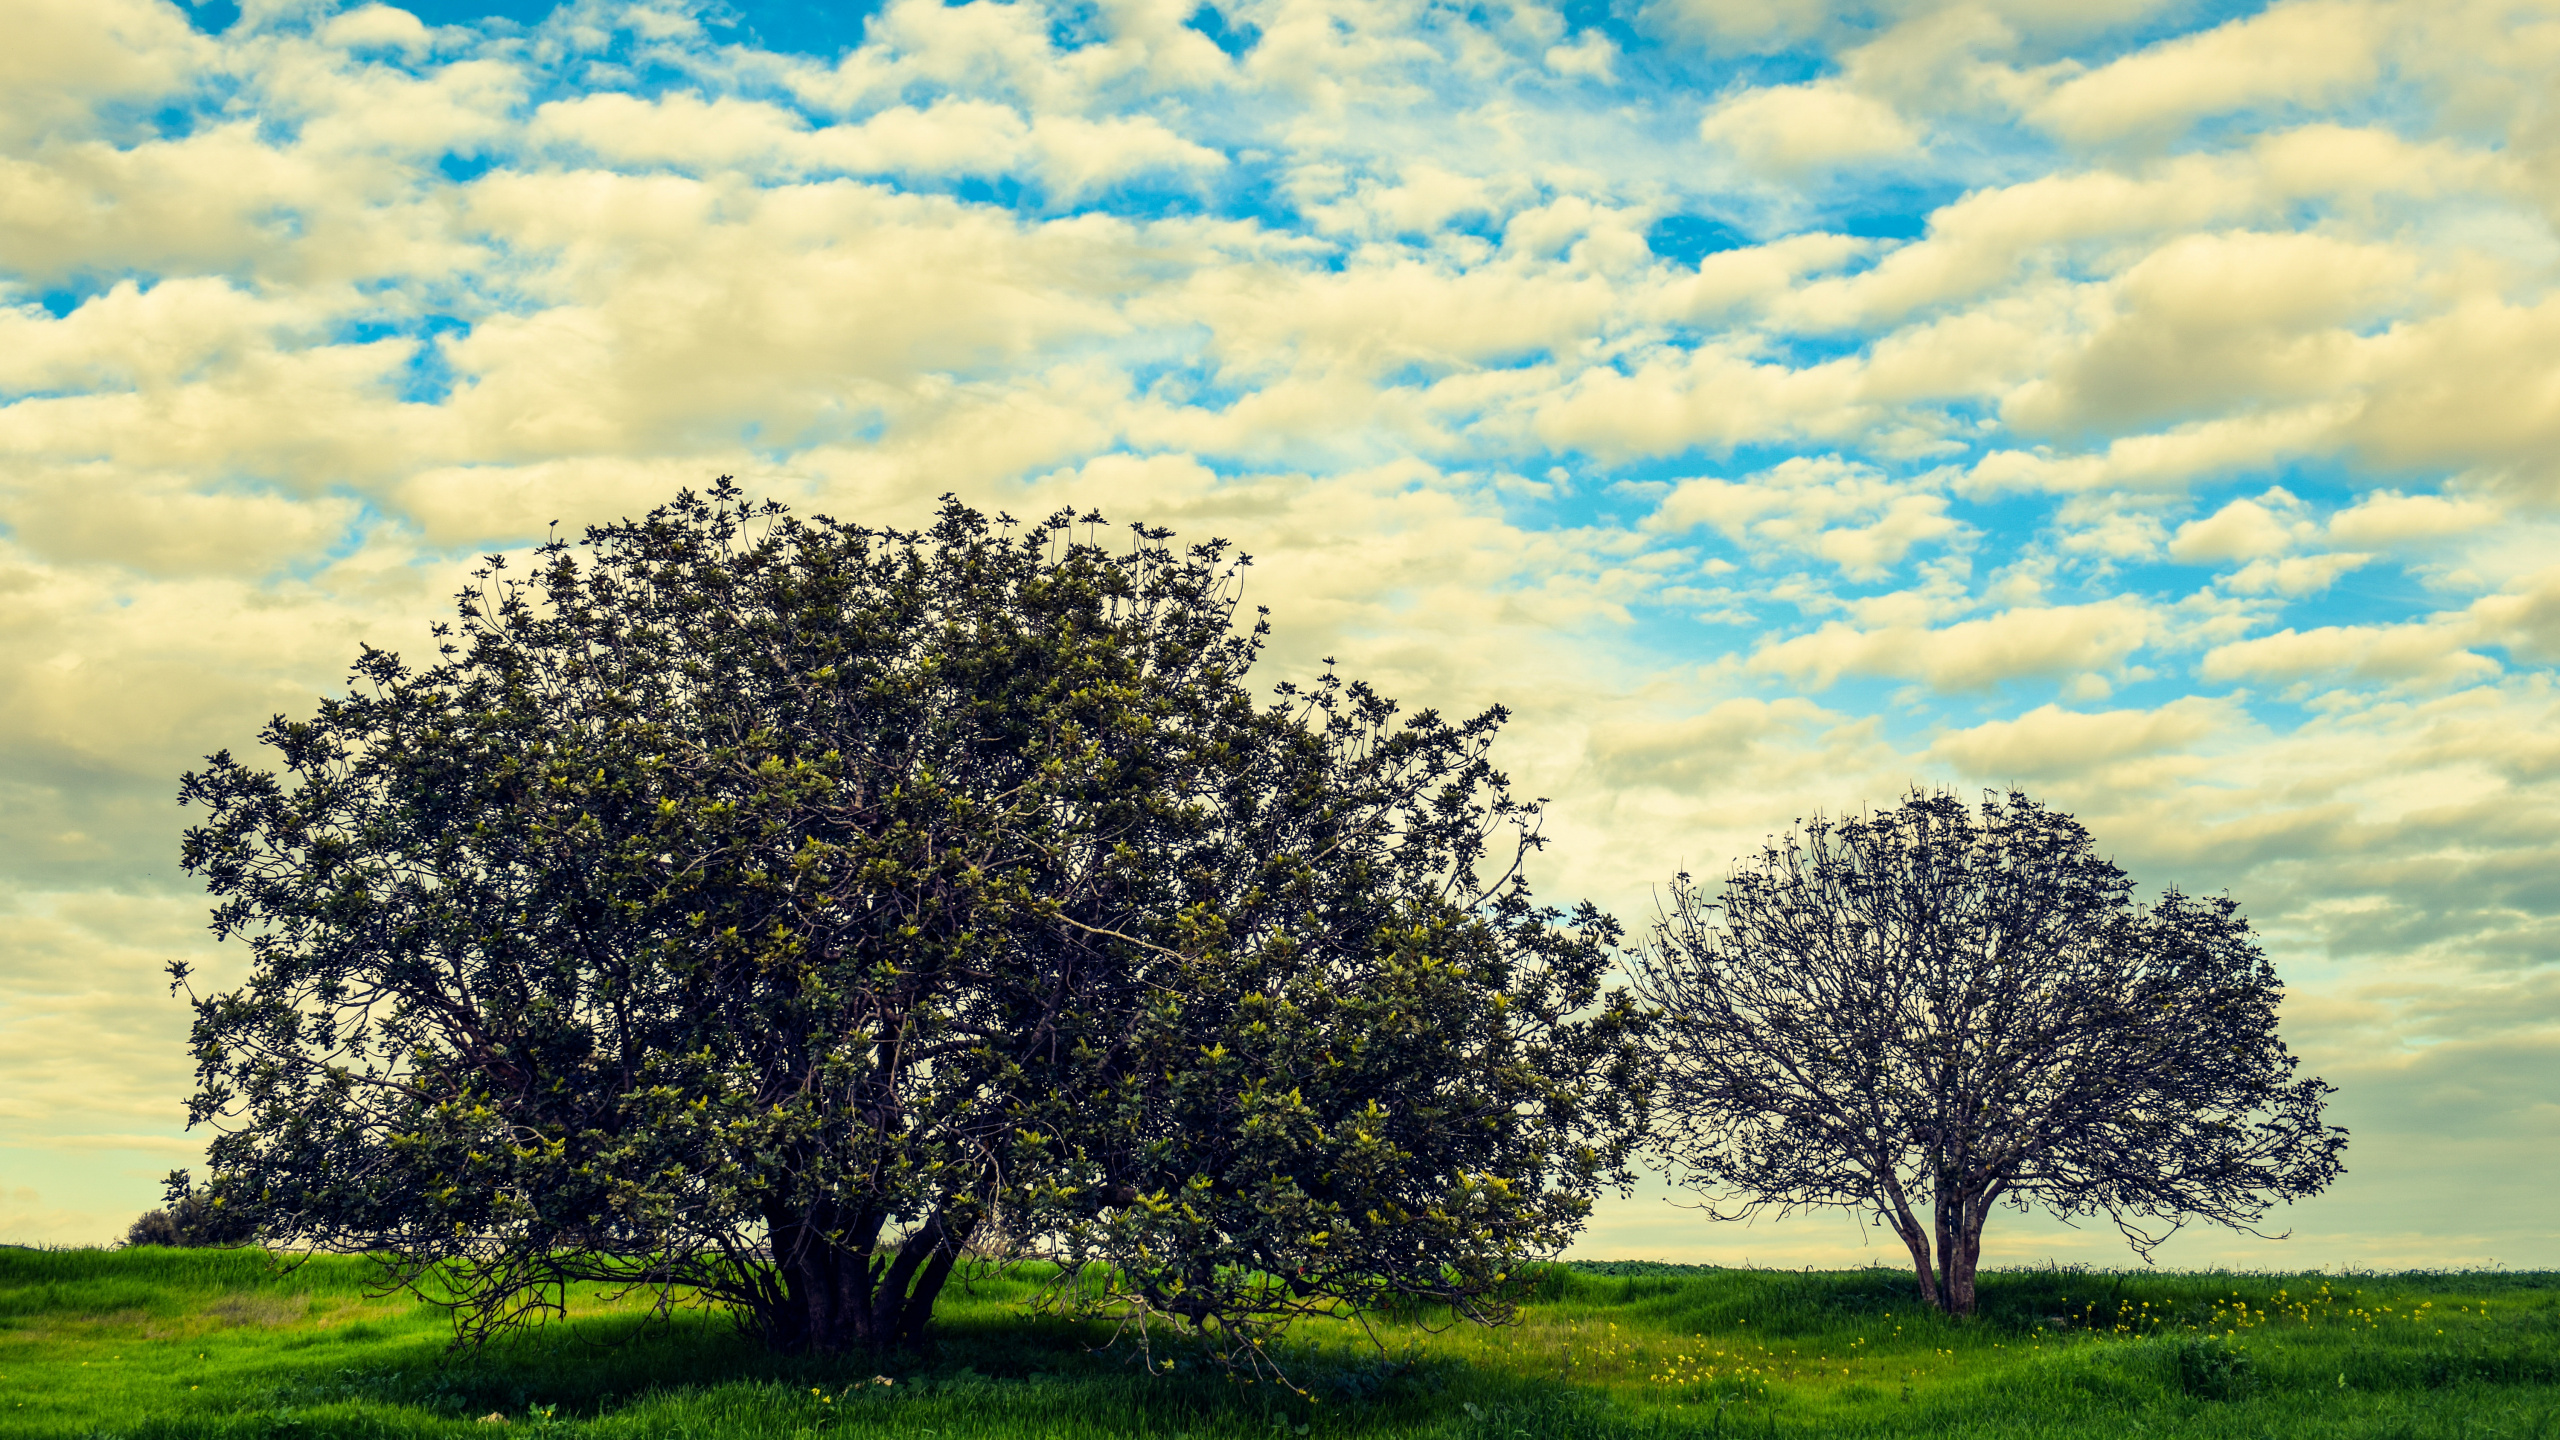 Green Tree on Green Grass Field Under Blue and White Cloudy Sky During Daytime. Wallpaper in 2560x1440 Resolution